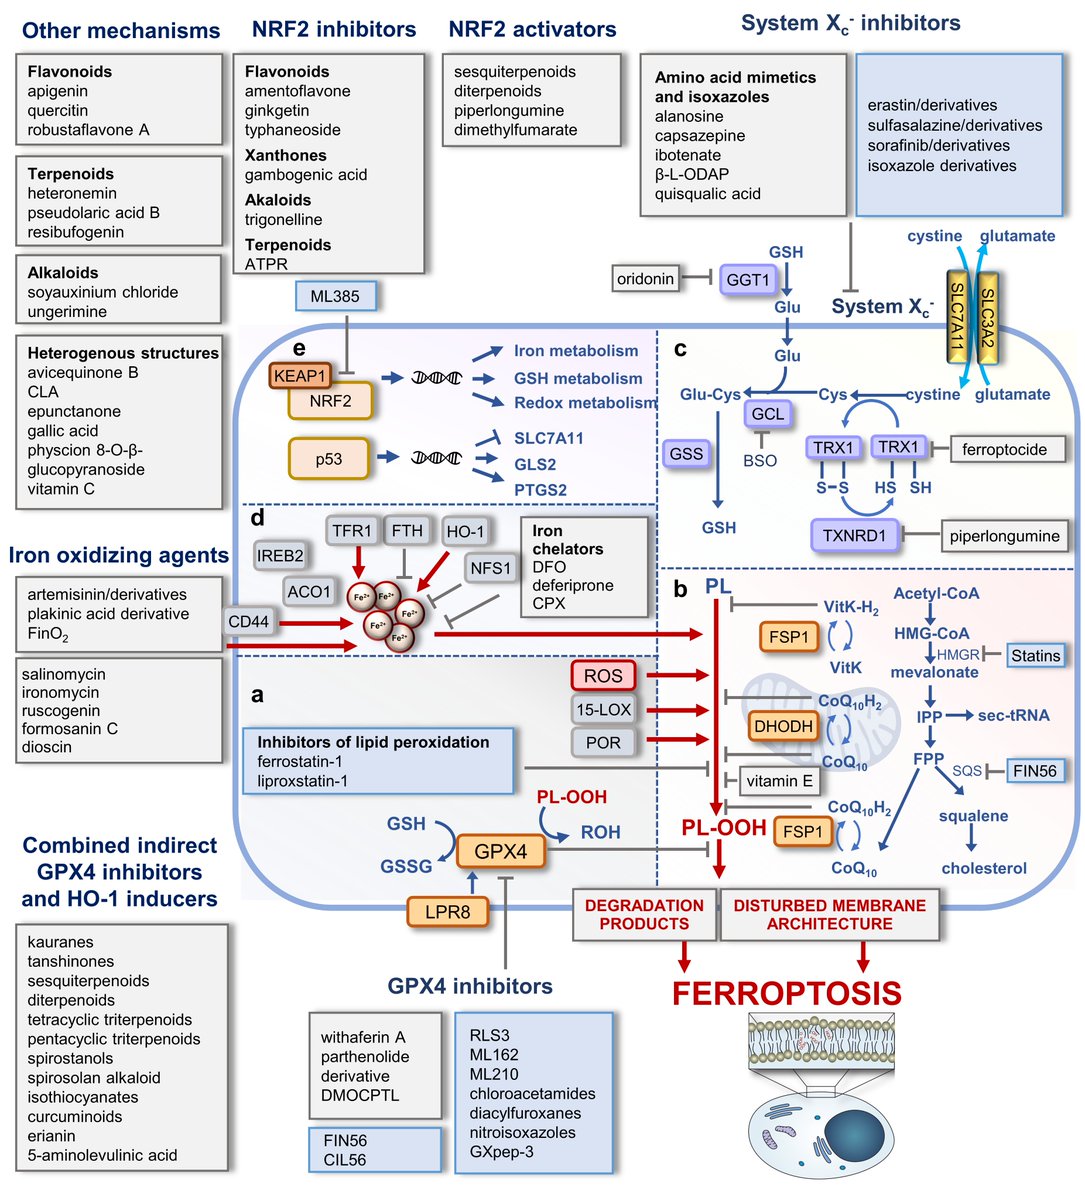 Check out our review on #ferroptosis-inducing agents in #MedicinalResearchReviews! We discuss the challenges and opportunities in the development of redox therapeutics for a targeted #cancer therapy.
doi.org/10.1002/med.21…
#celldeath #peroxidation @uniinnsbruck @UniJena